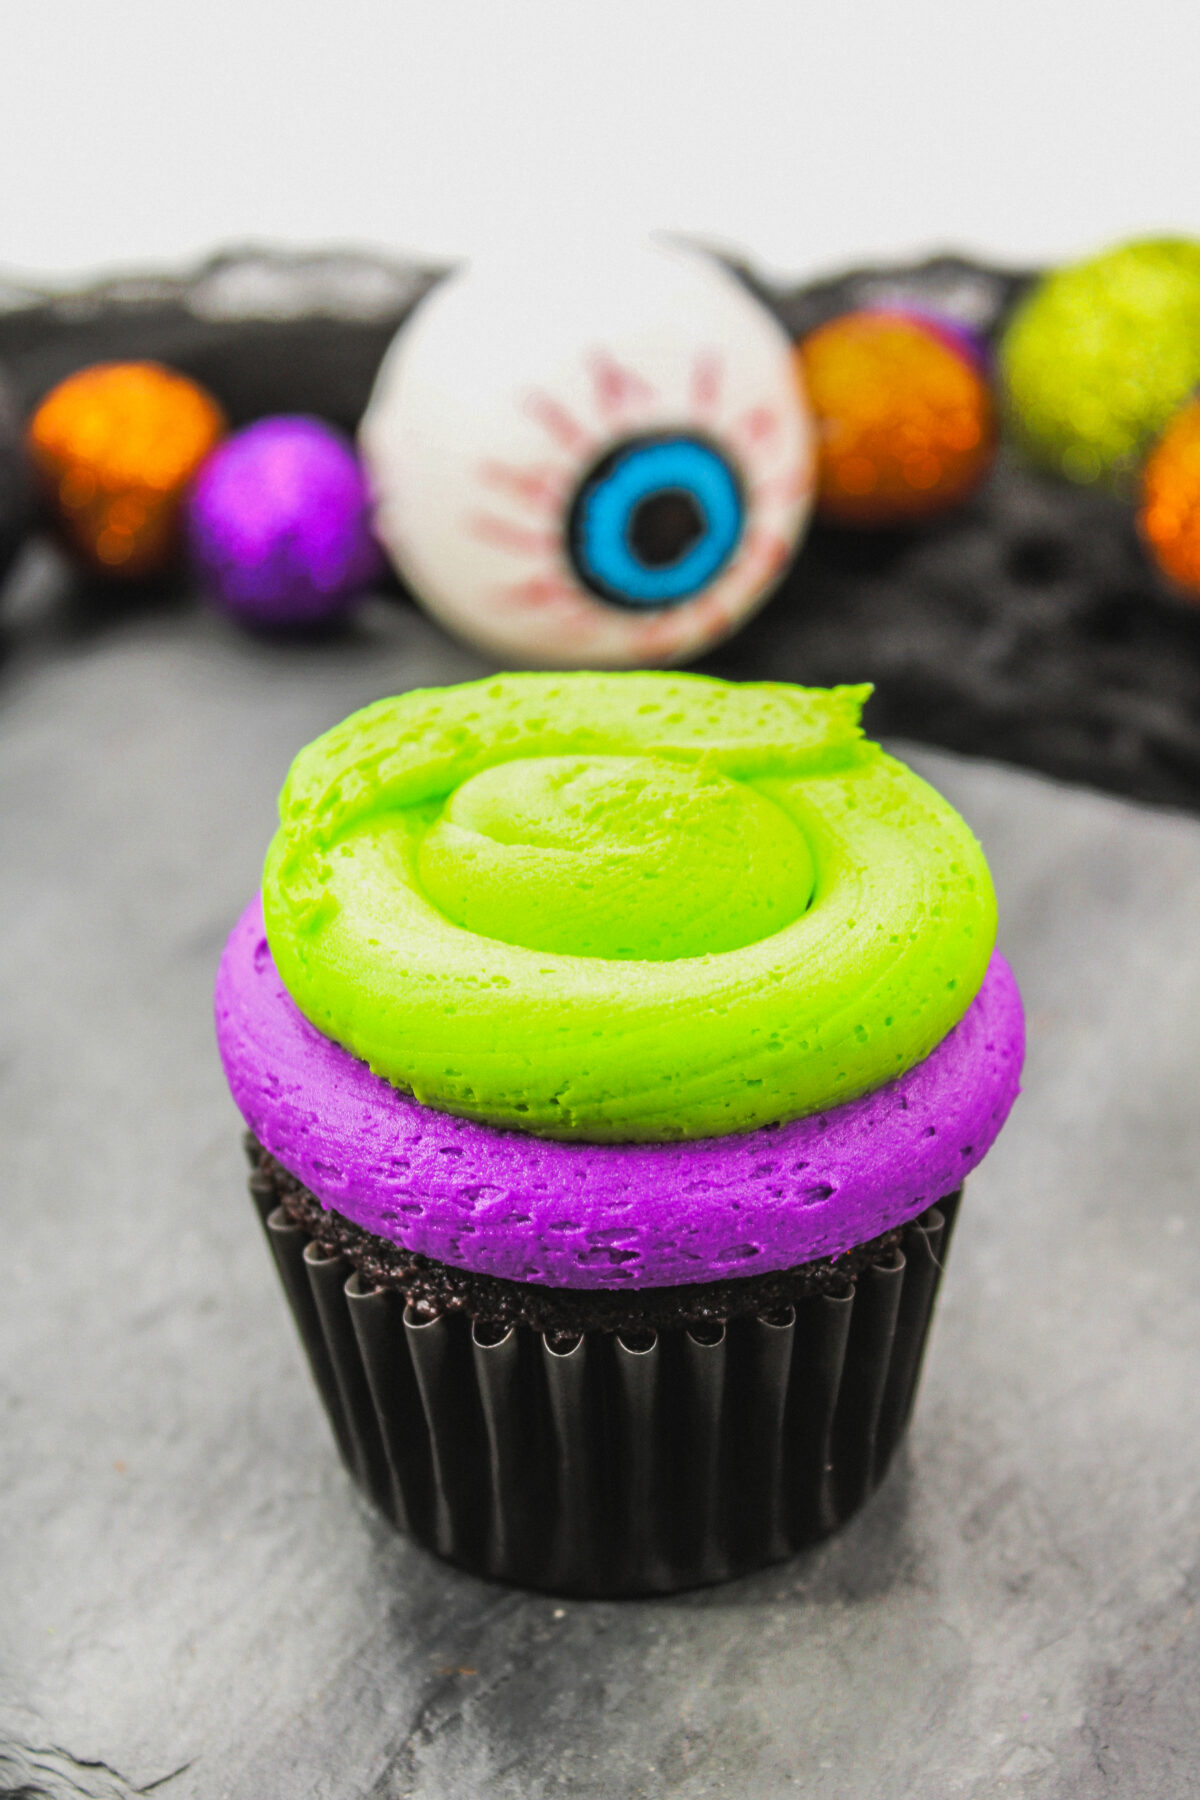 Cupcake with a layer of green frosting on top of the purple frosting.